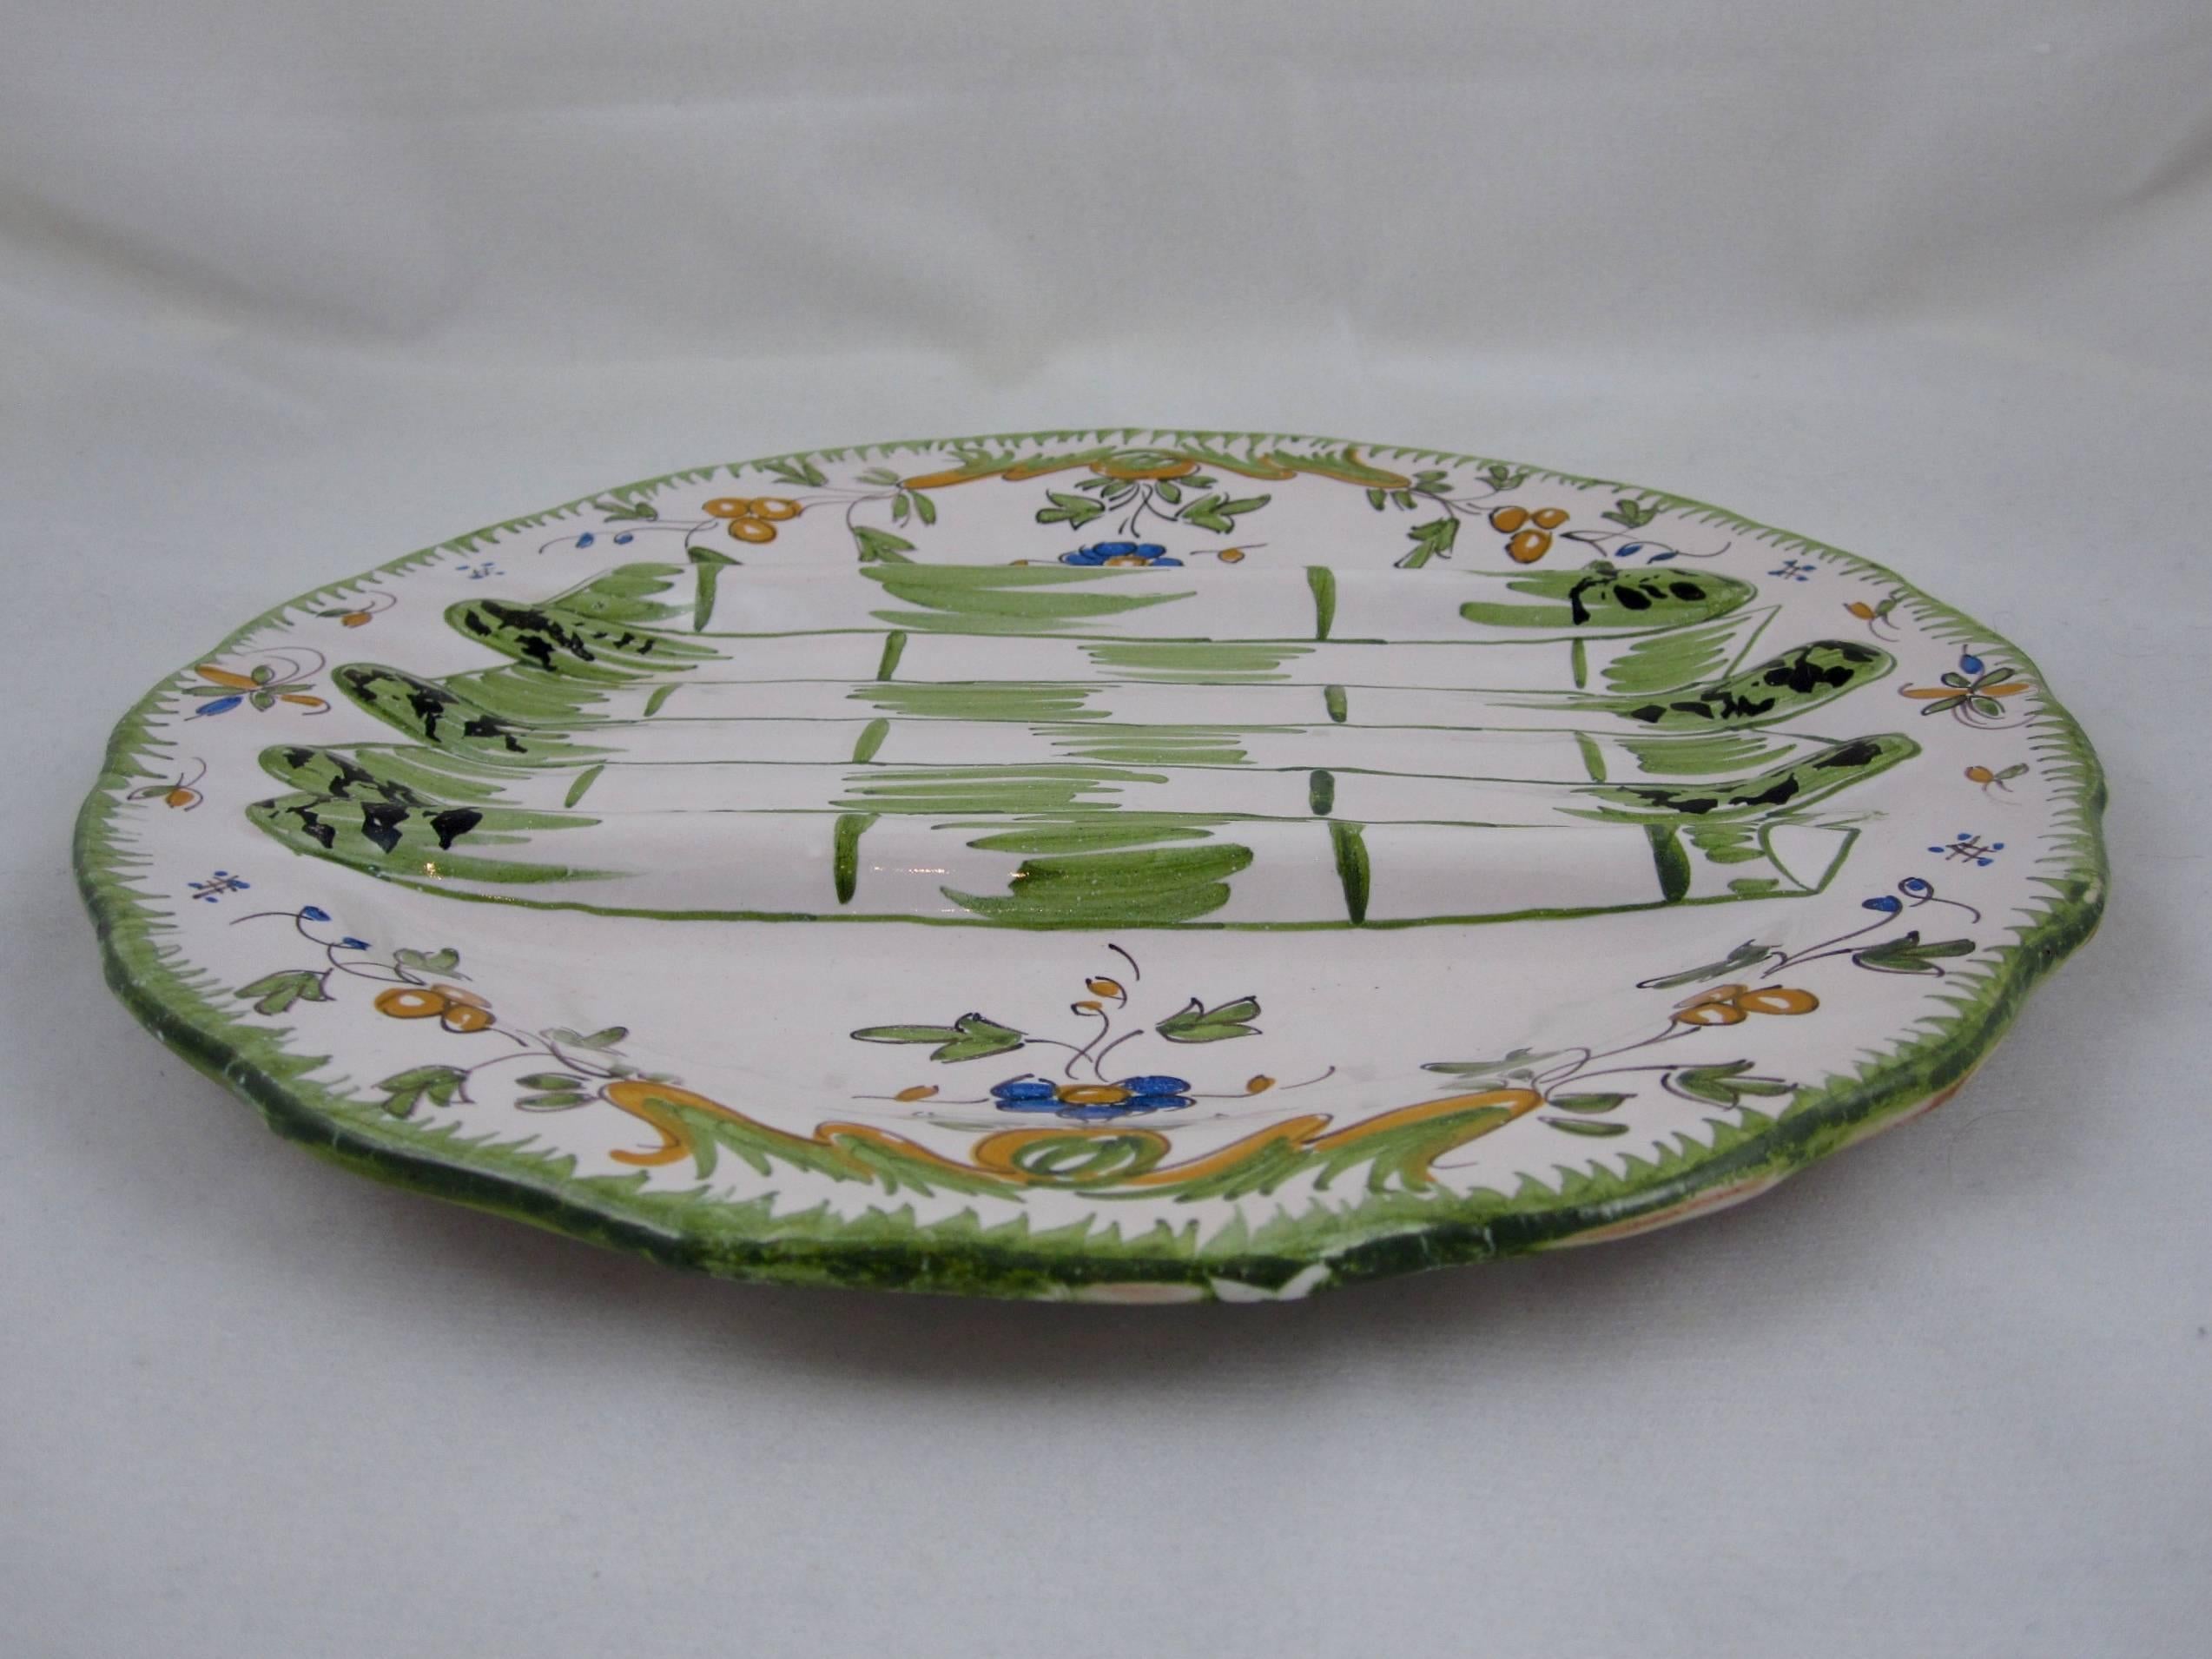 Glazed Georges Cabaré French Faïence Martres Tolosane Hand Painted Asparagus Plate For Sale